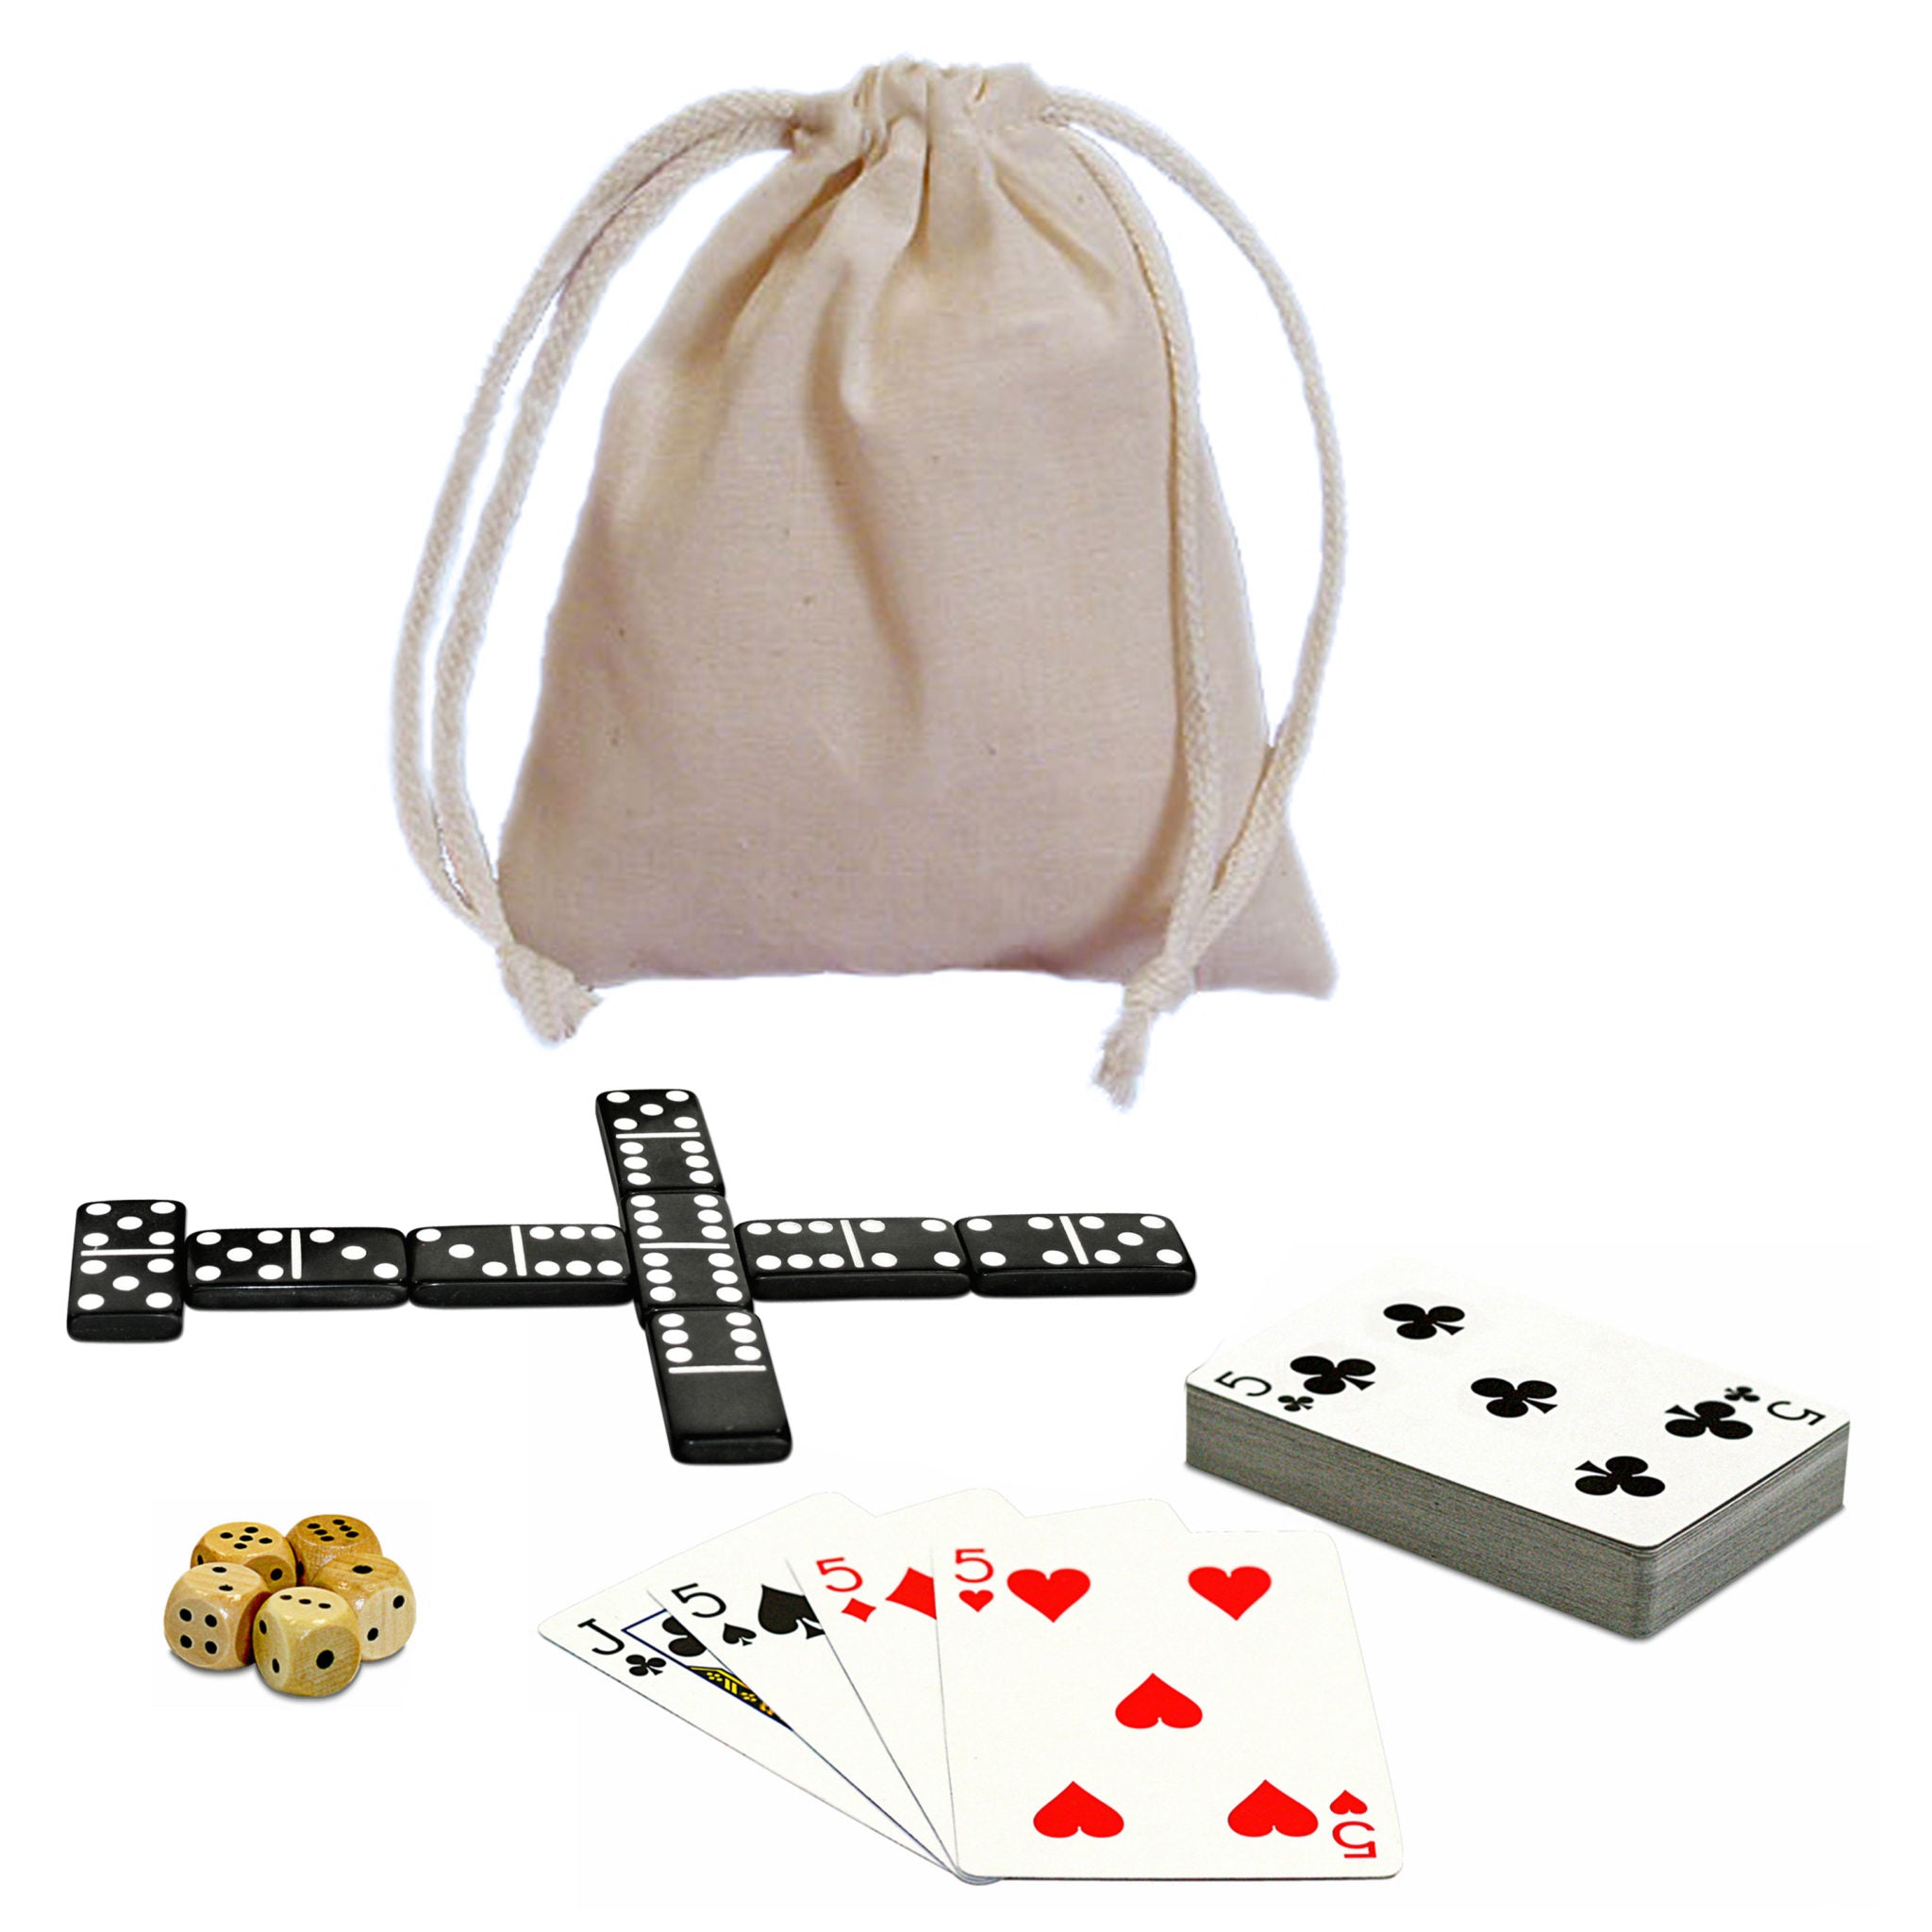 Dominoes & More in a Travel Pouch | Kessel Run Games Inc. 